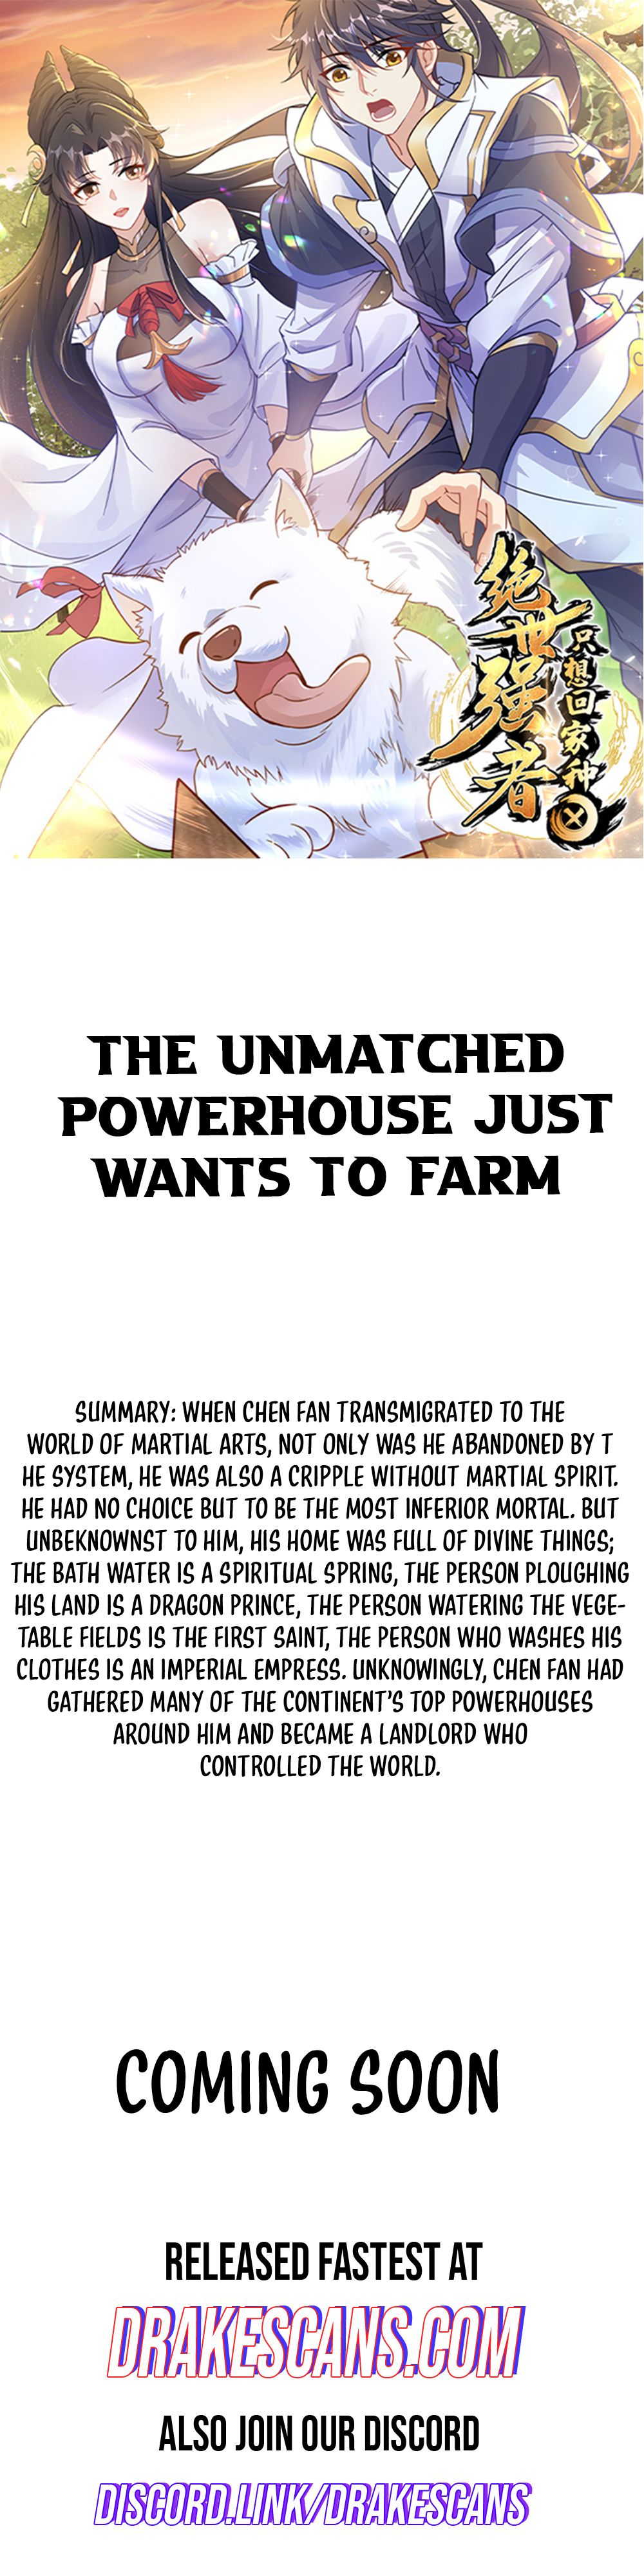 The Unmatched Powerhouse Just Wants To Farm chapter 0 - page 1